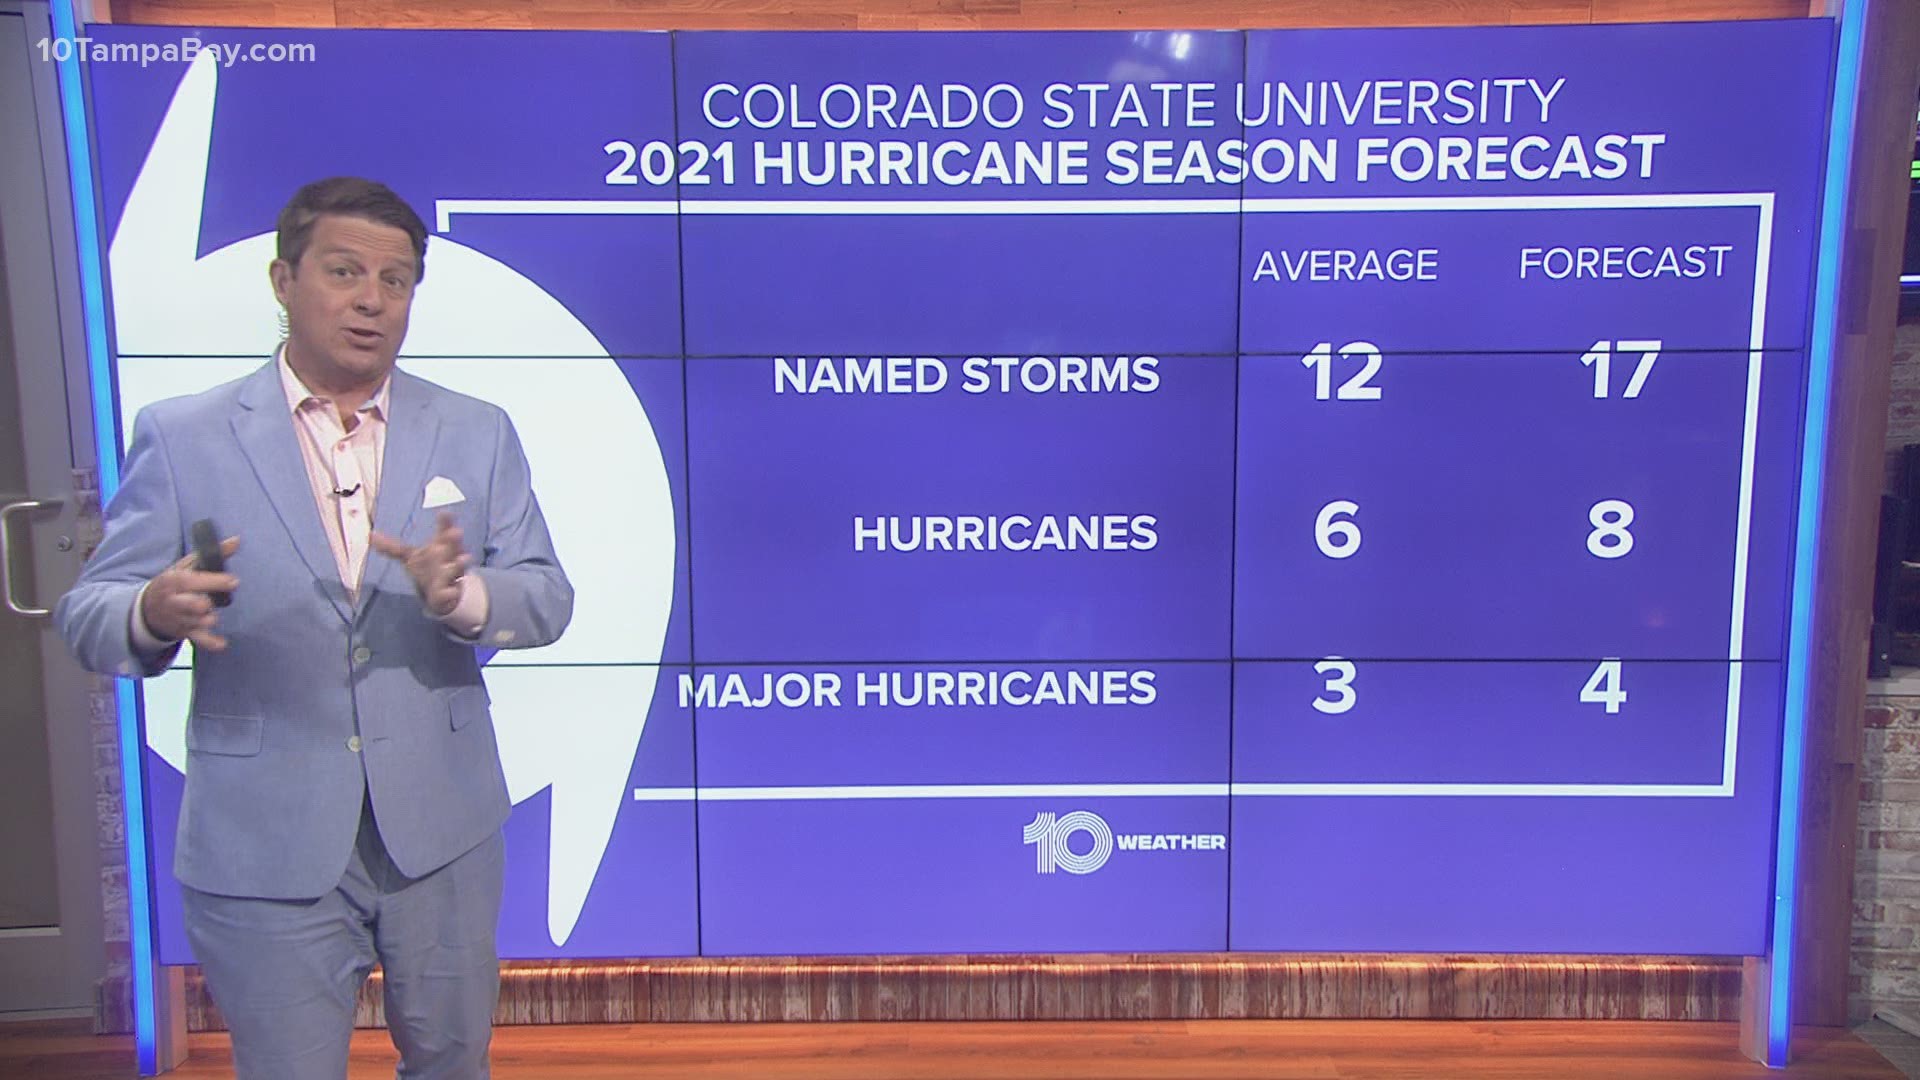 The forecast for 2021 calls for an active season, with 17 named tropical storms, and eight of them possibly becoming hurricanes.